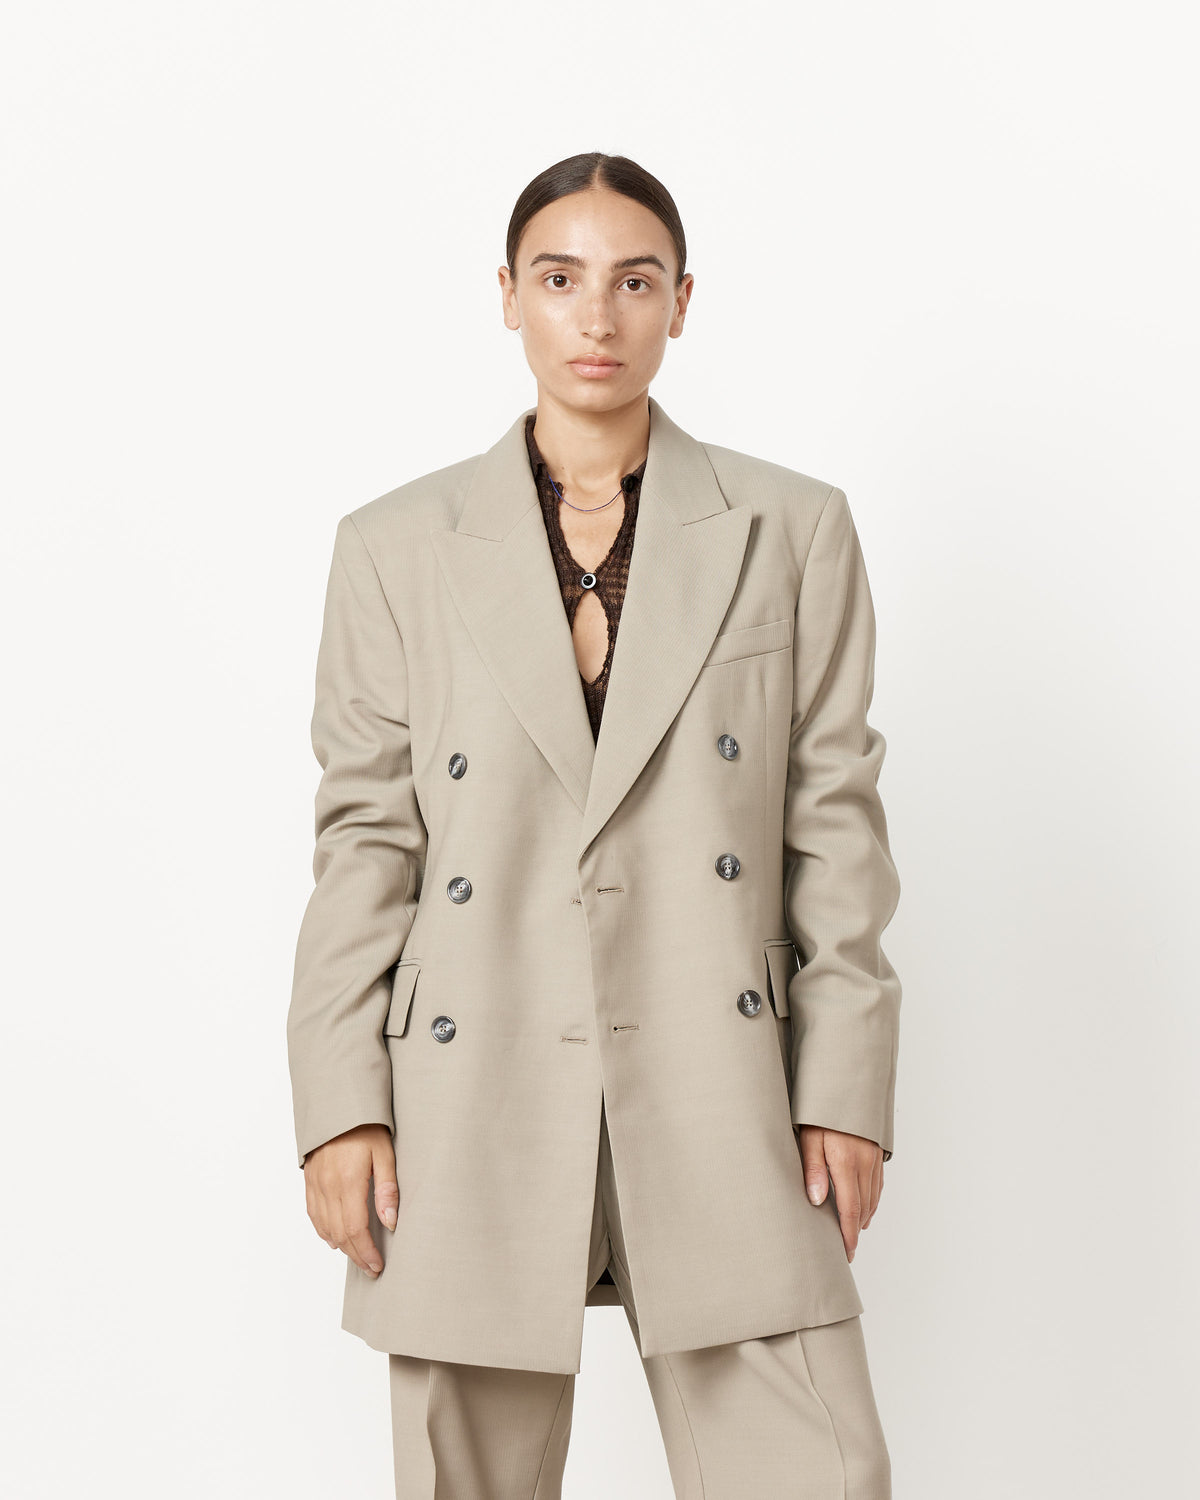 Shop Double-Breasted Suit Jacket Acne Studios online and get the lowest ...